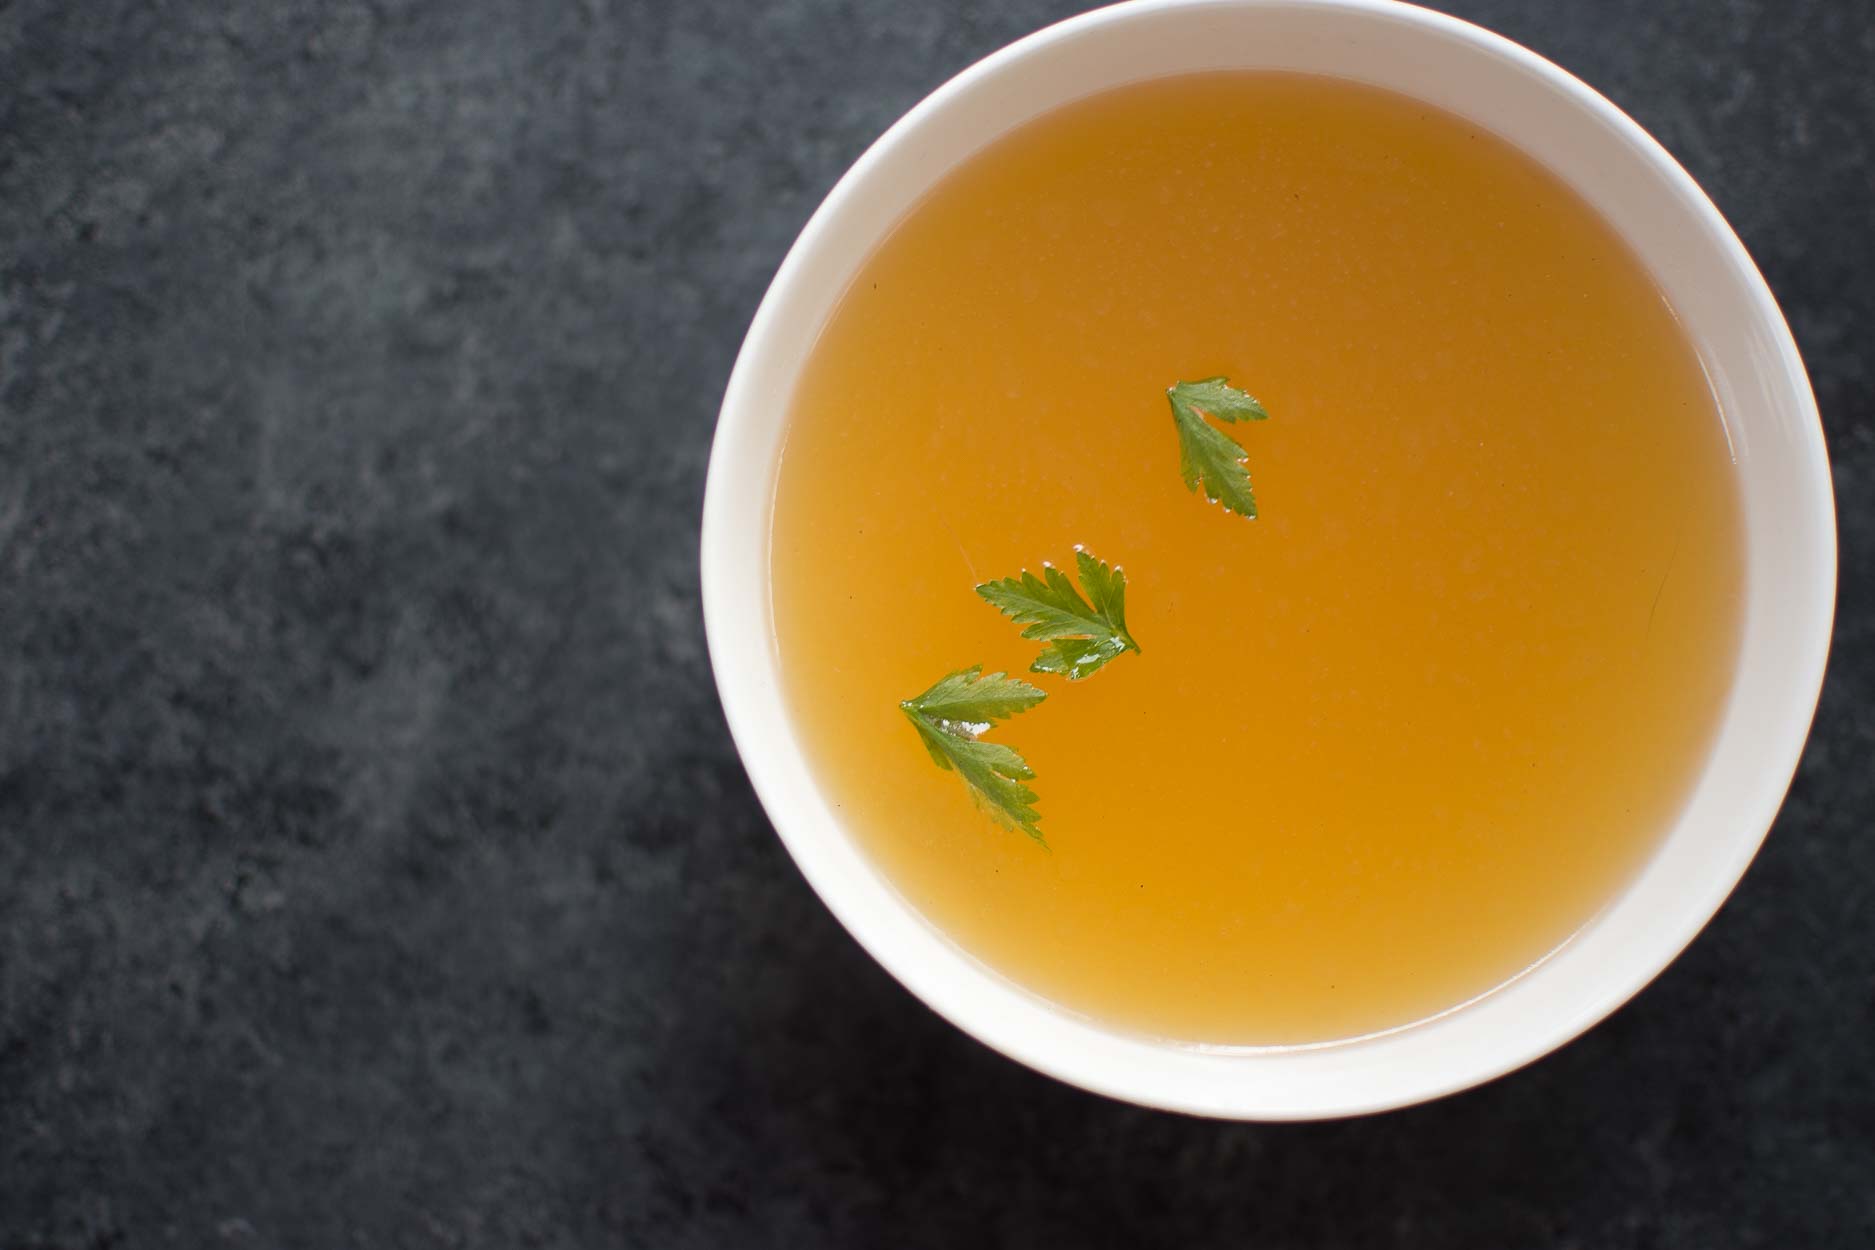 Troubleshooting bone broth: What to do when your broth won't gel.